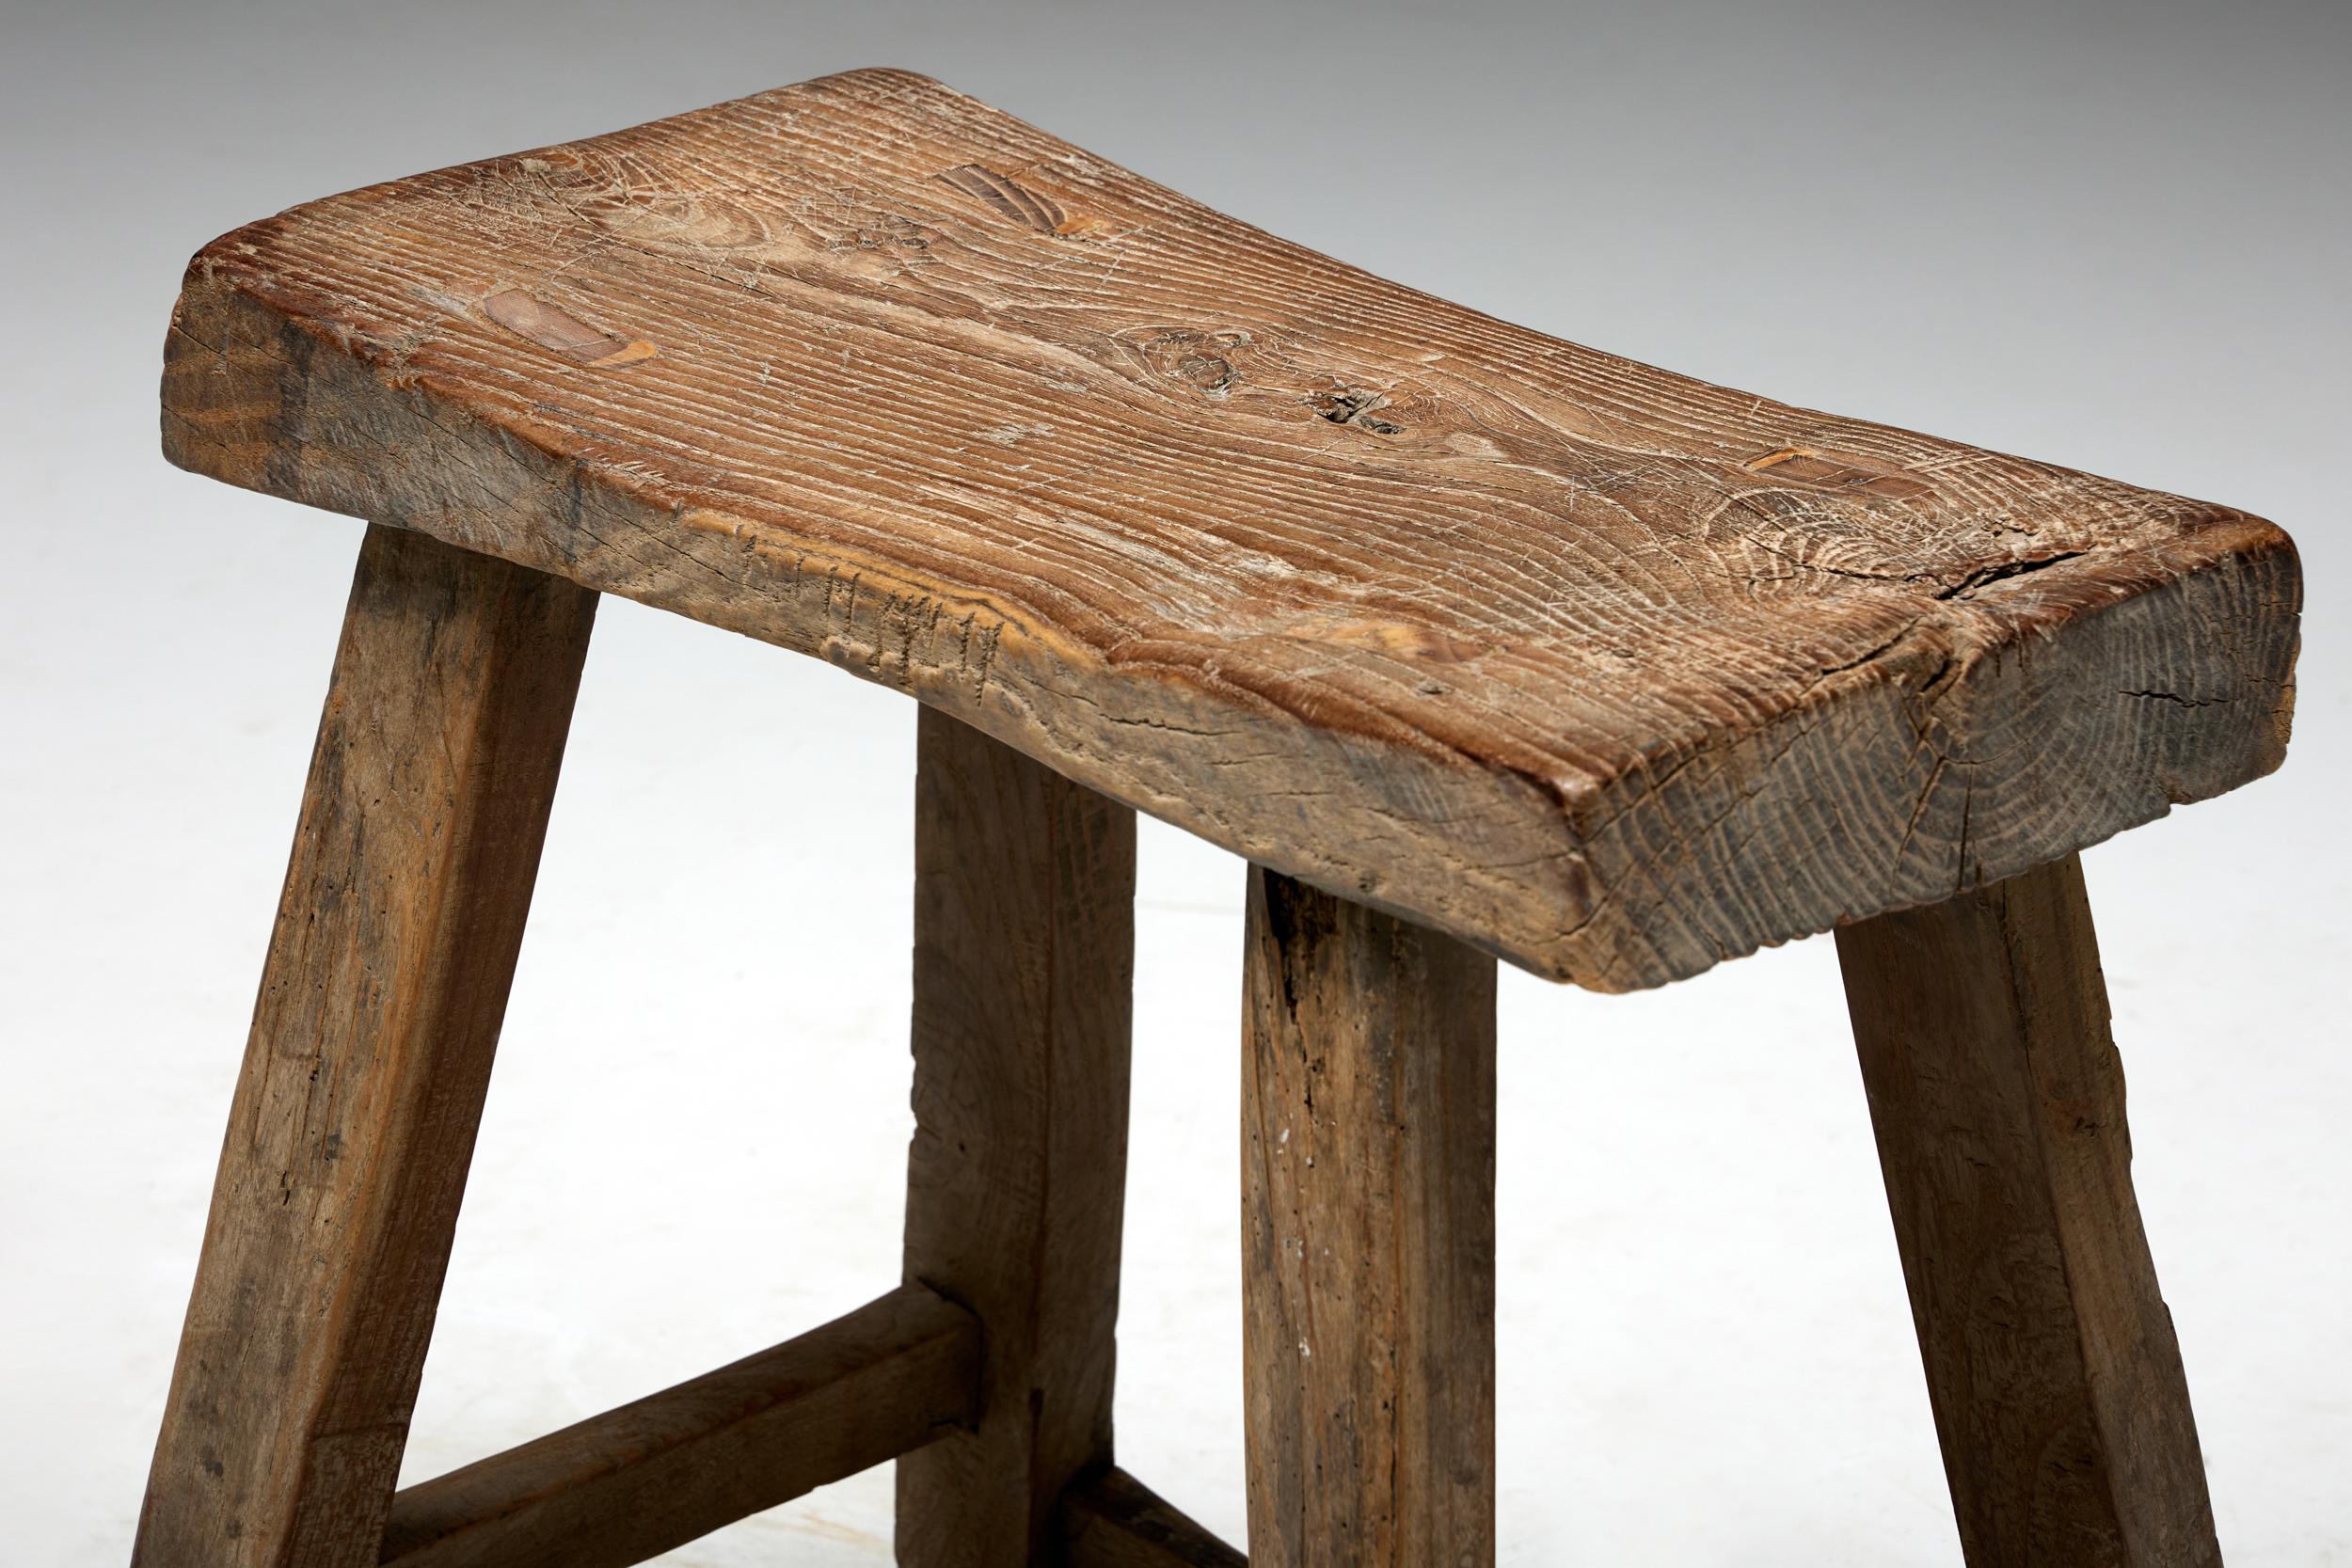 Rustic Travail Populaire Stool, France, Early 20th Century For Sale 4